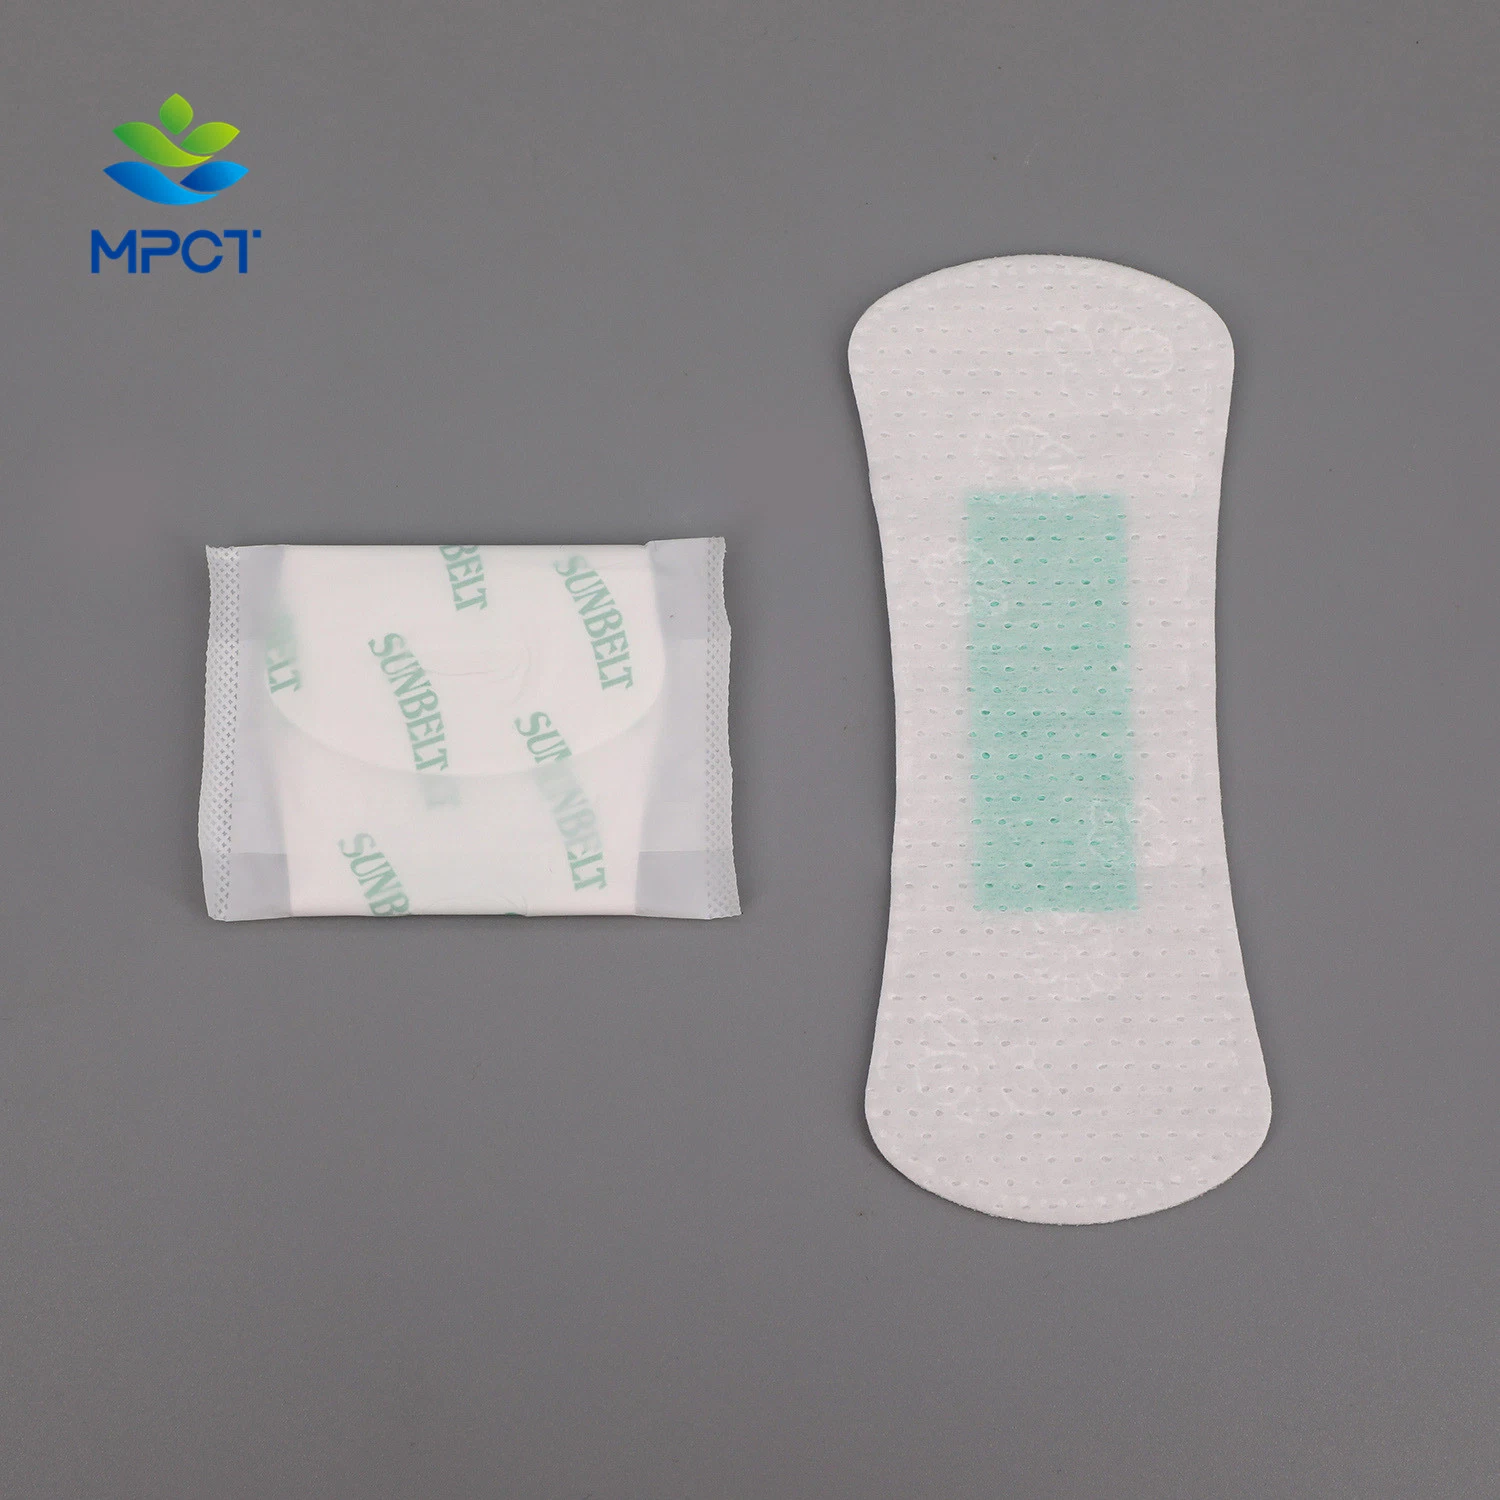 Antibacterial Sanitary Napkins/High Quality/No Allergic/No Stimulation/Fashion/Comfortable and Breathable